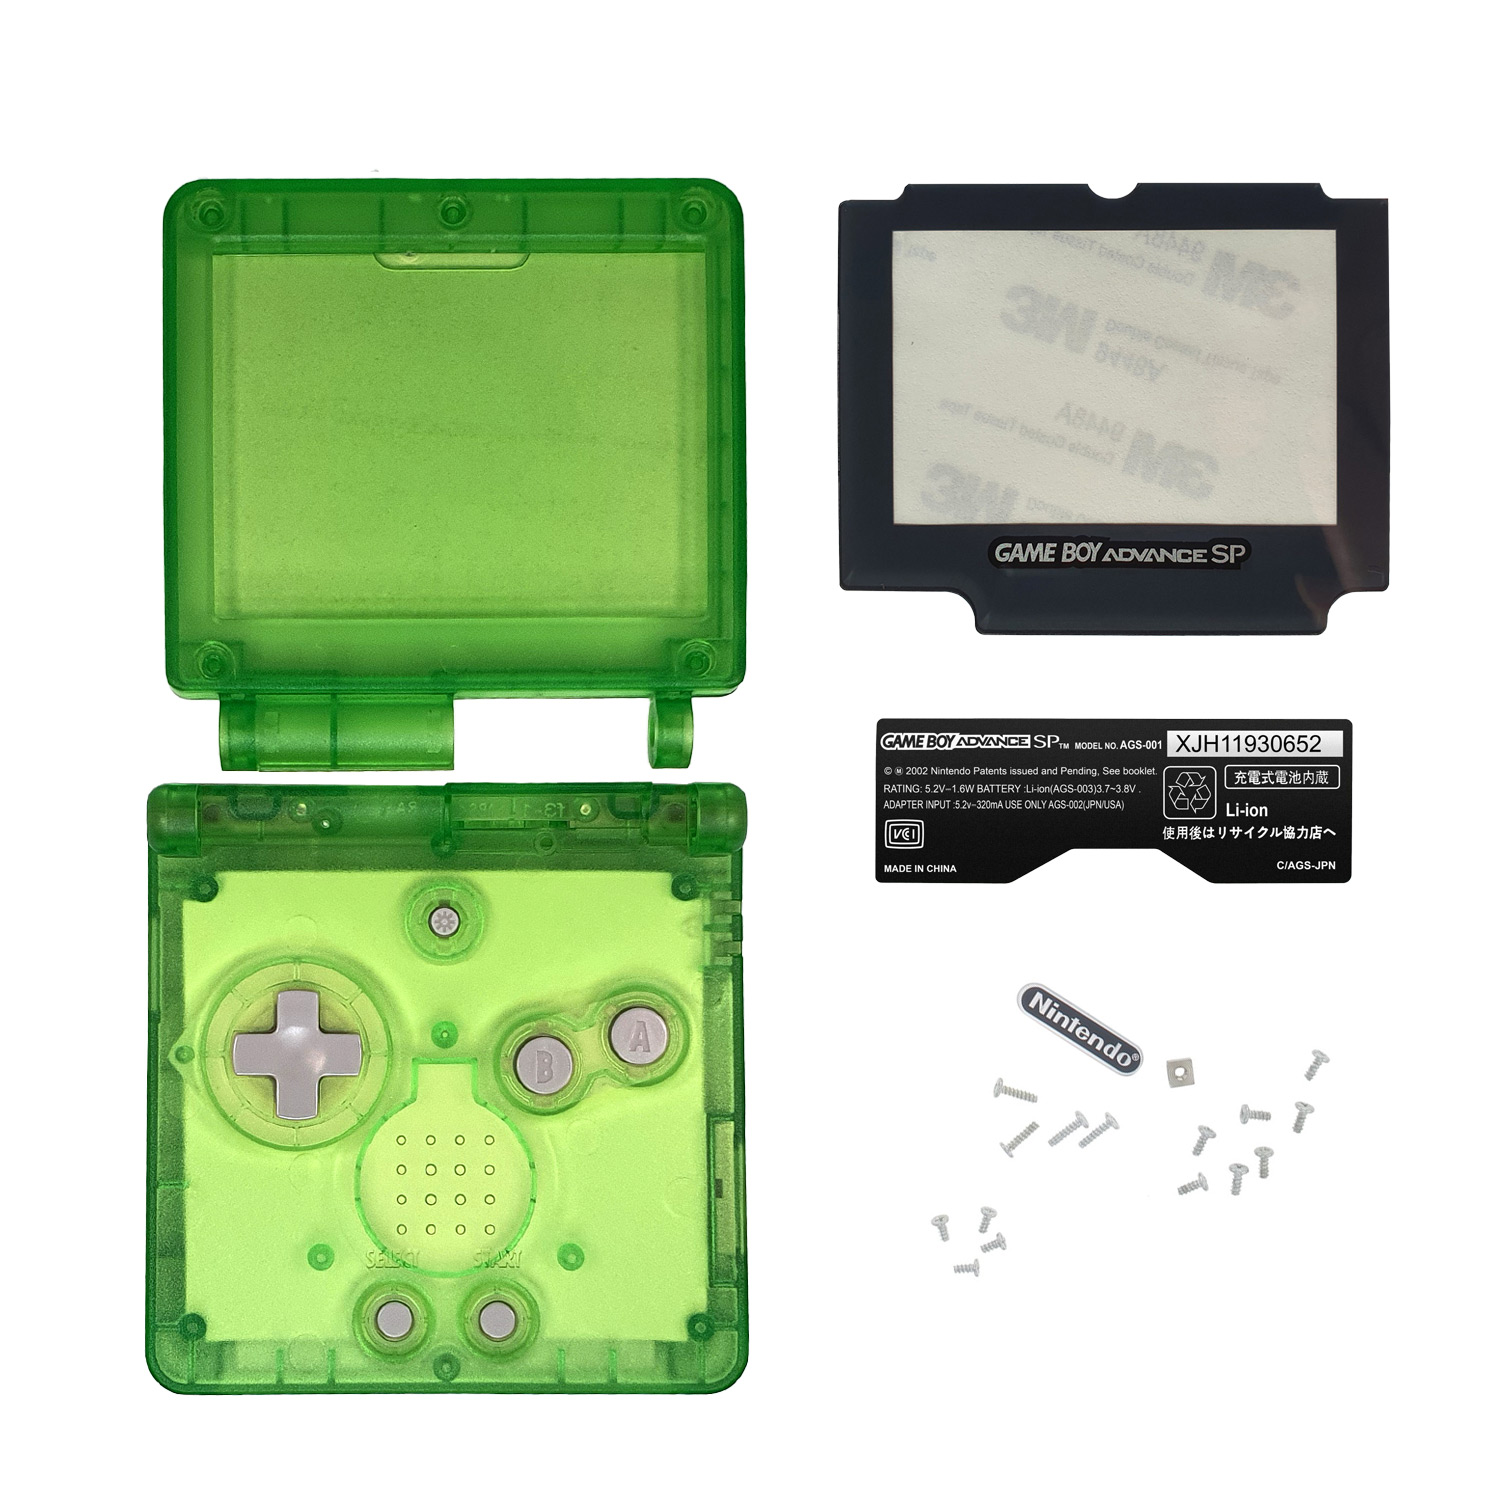 Game Boy Advance SP Shell (Clear Green)